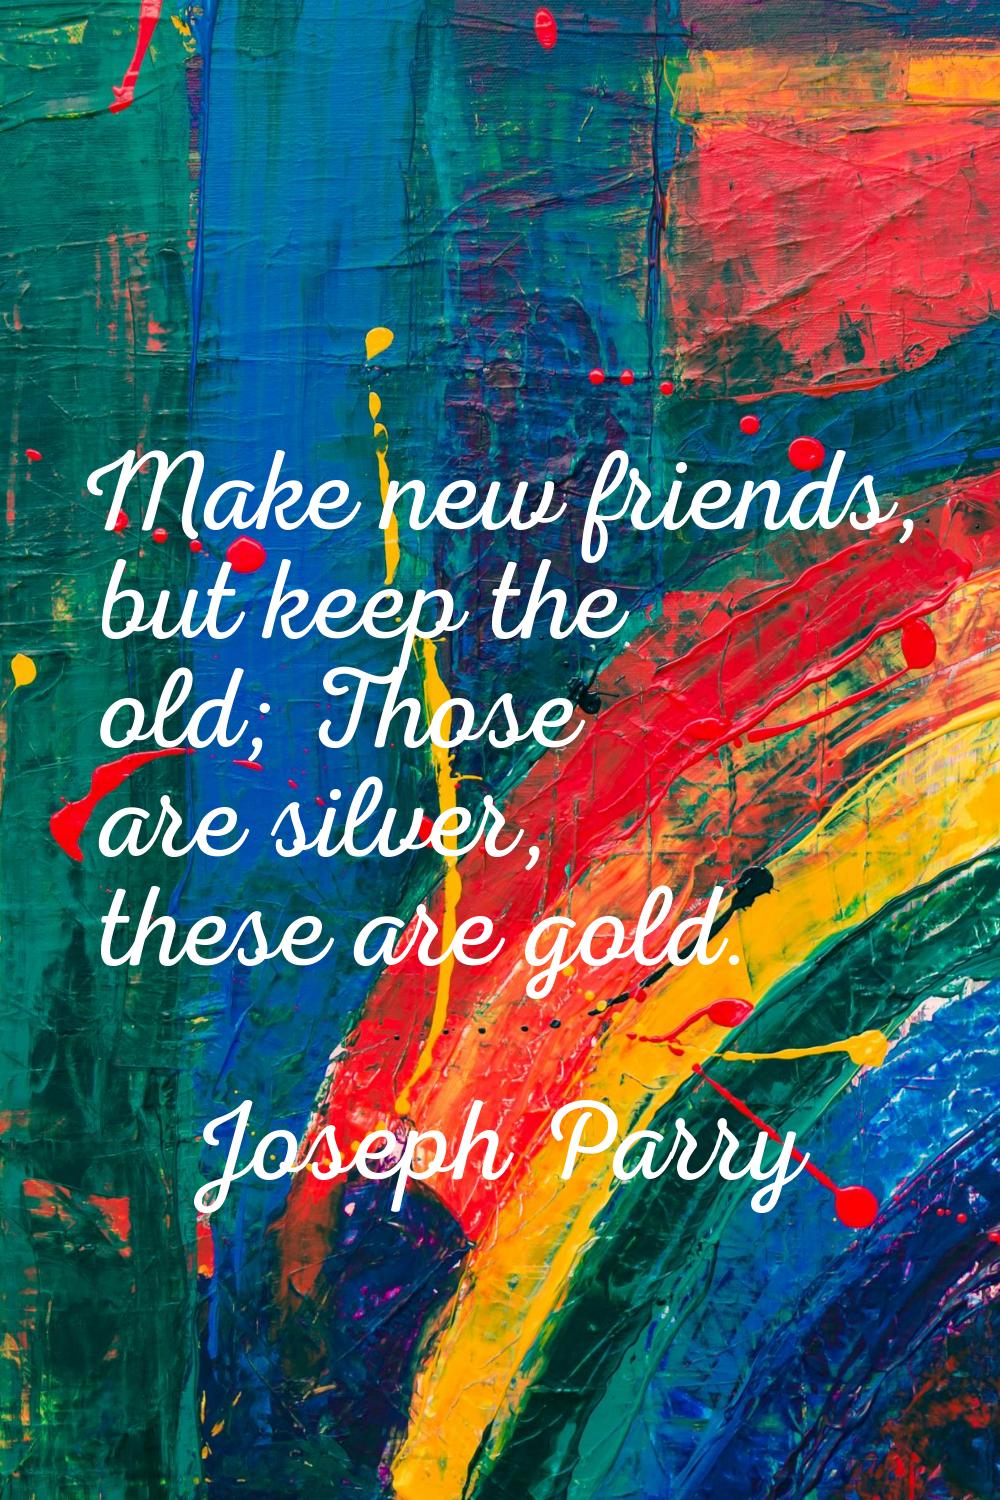 Make new friends, but keep the old; Those are silver, these are gold.